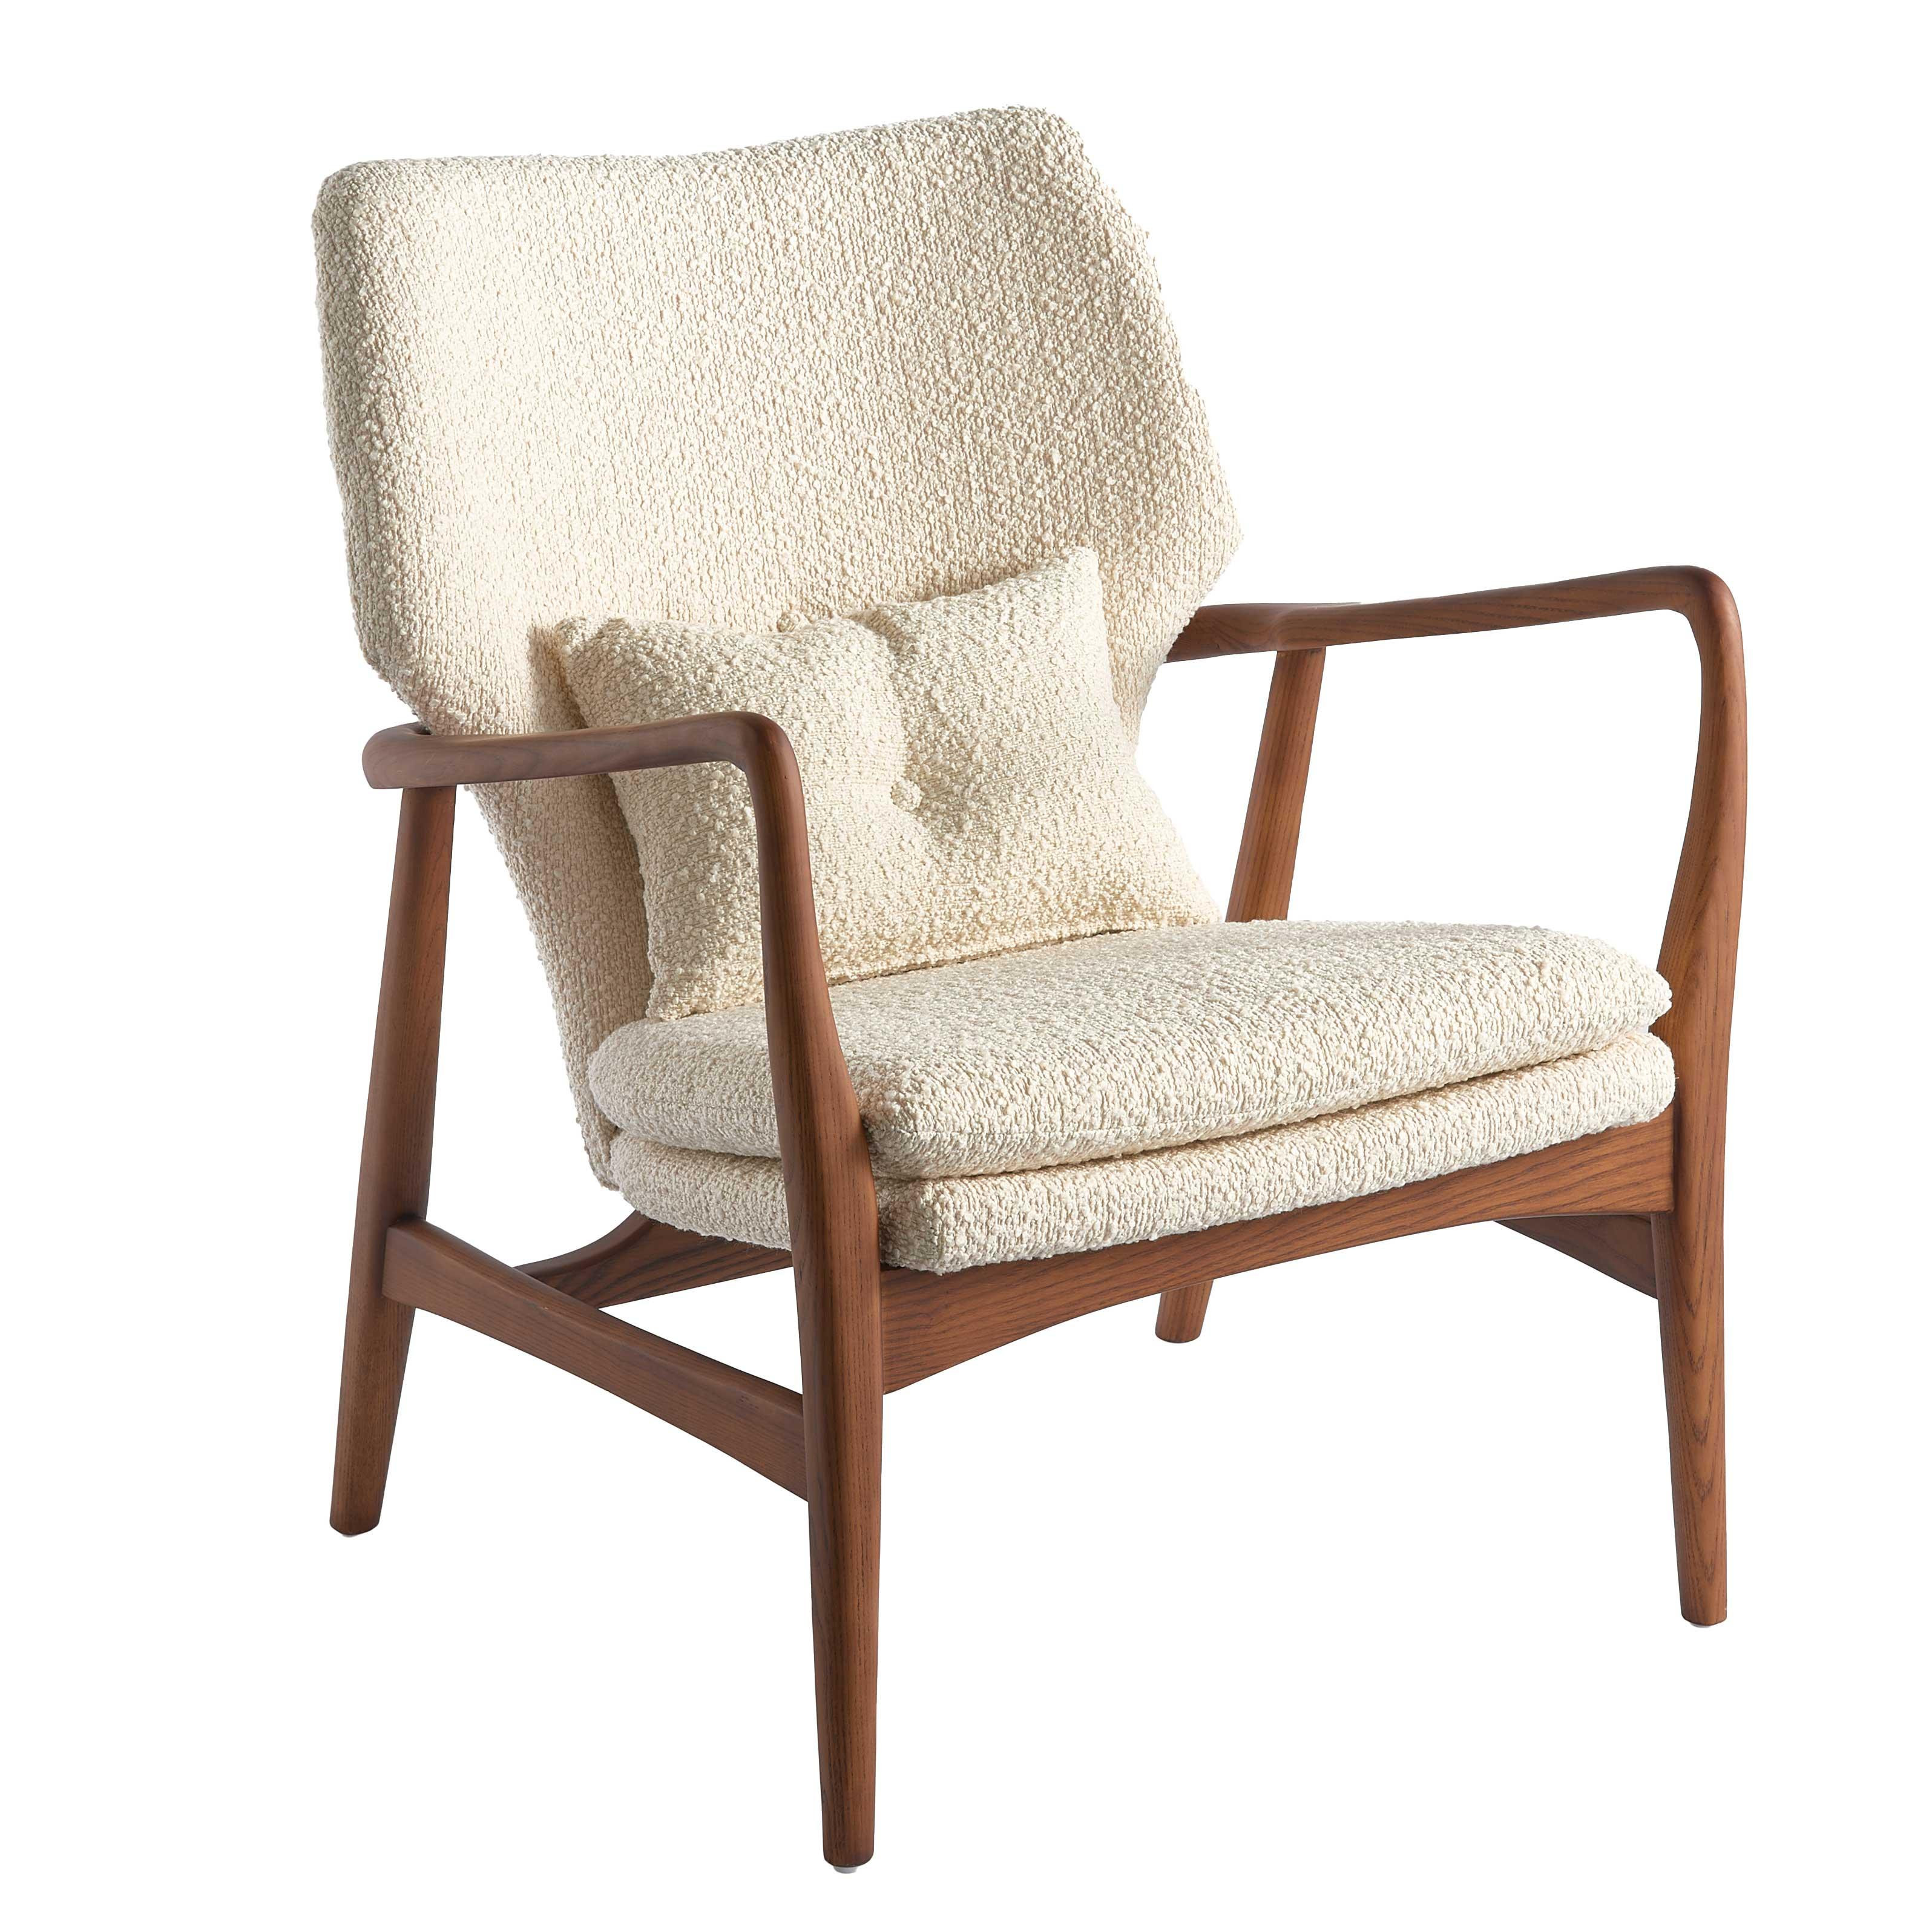 POLSPOTTEN Chair fauteuil stoel limited edition | Flinders